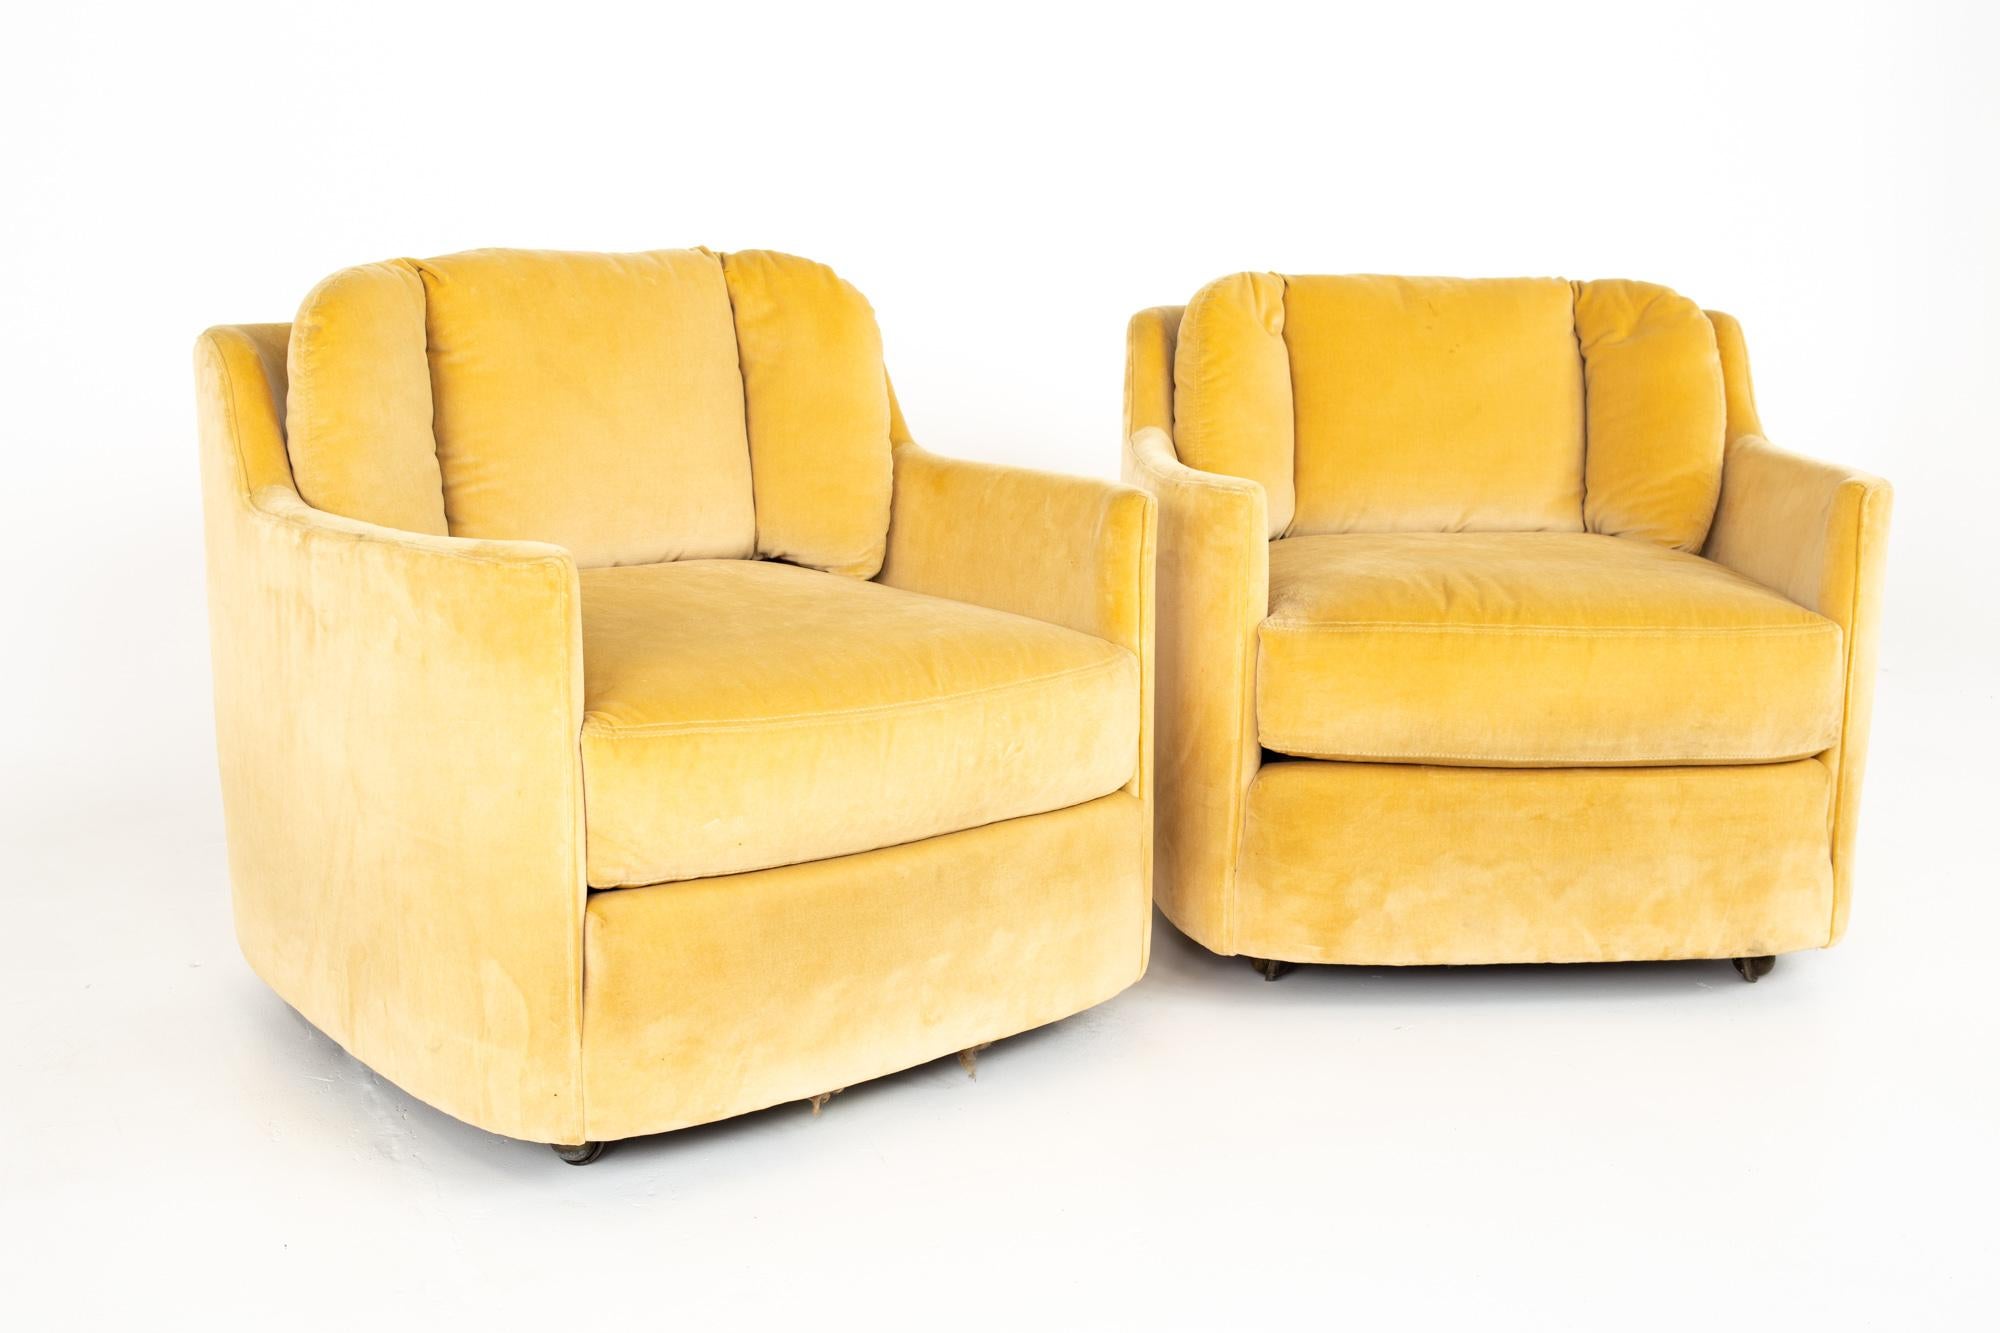 Henredon Folio 500 midcentury Barrel lounge chairs - pair
Each chair measures: 30.5 wide x 34.25 deep x 28 high, with a seat height of 17 inches

Each piece of furniture is available in what we call restored vintage condition. Upon purchase it is